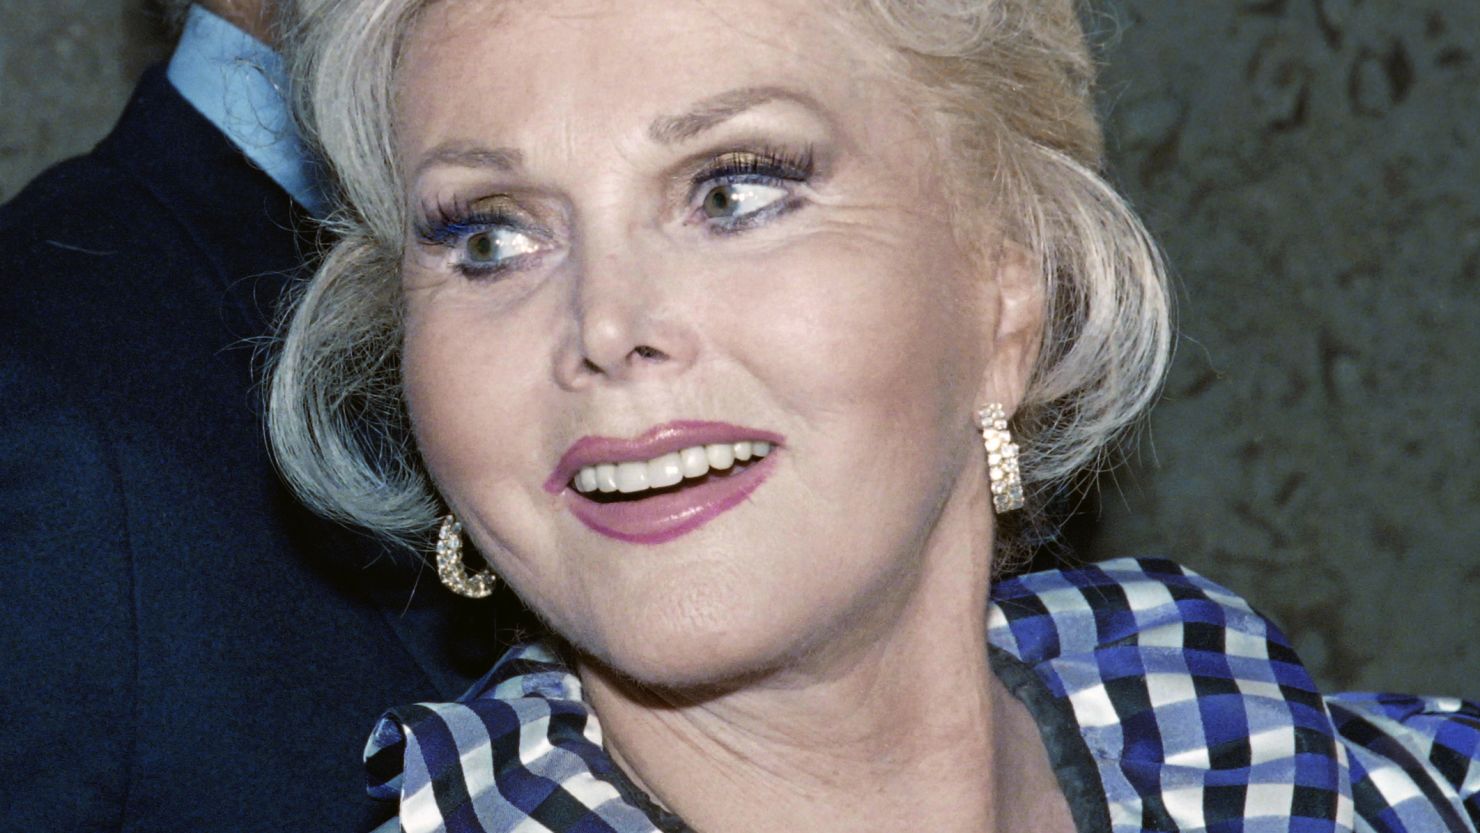 Zsa Zsa Gabor, seen here in a 1999 photo, has been confined to a bed for two years.